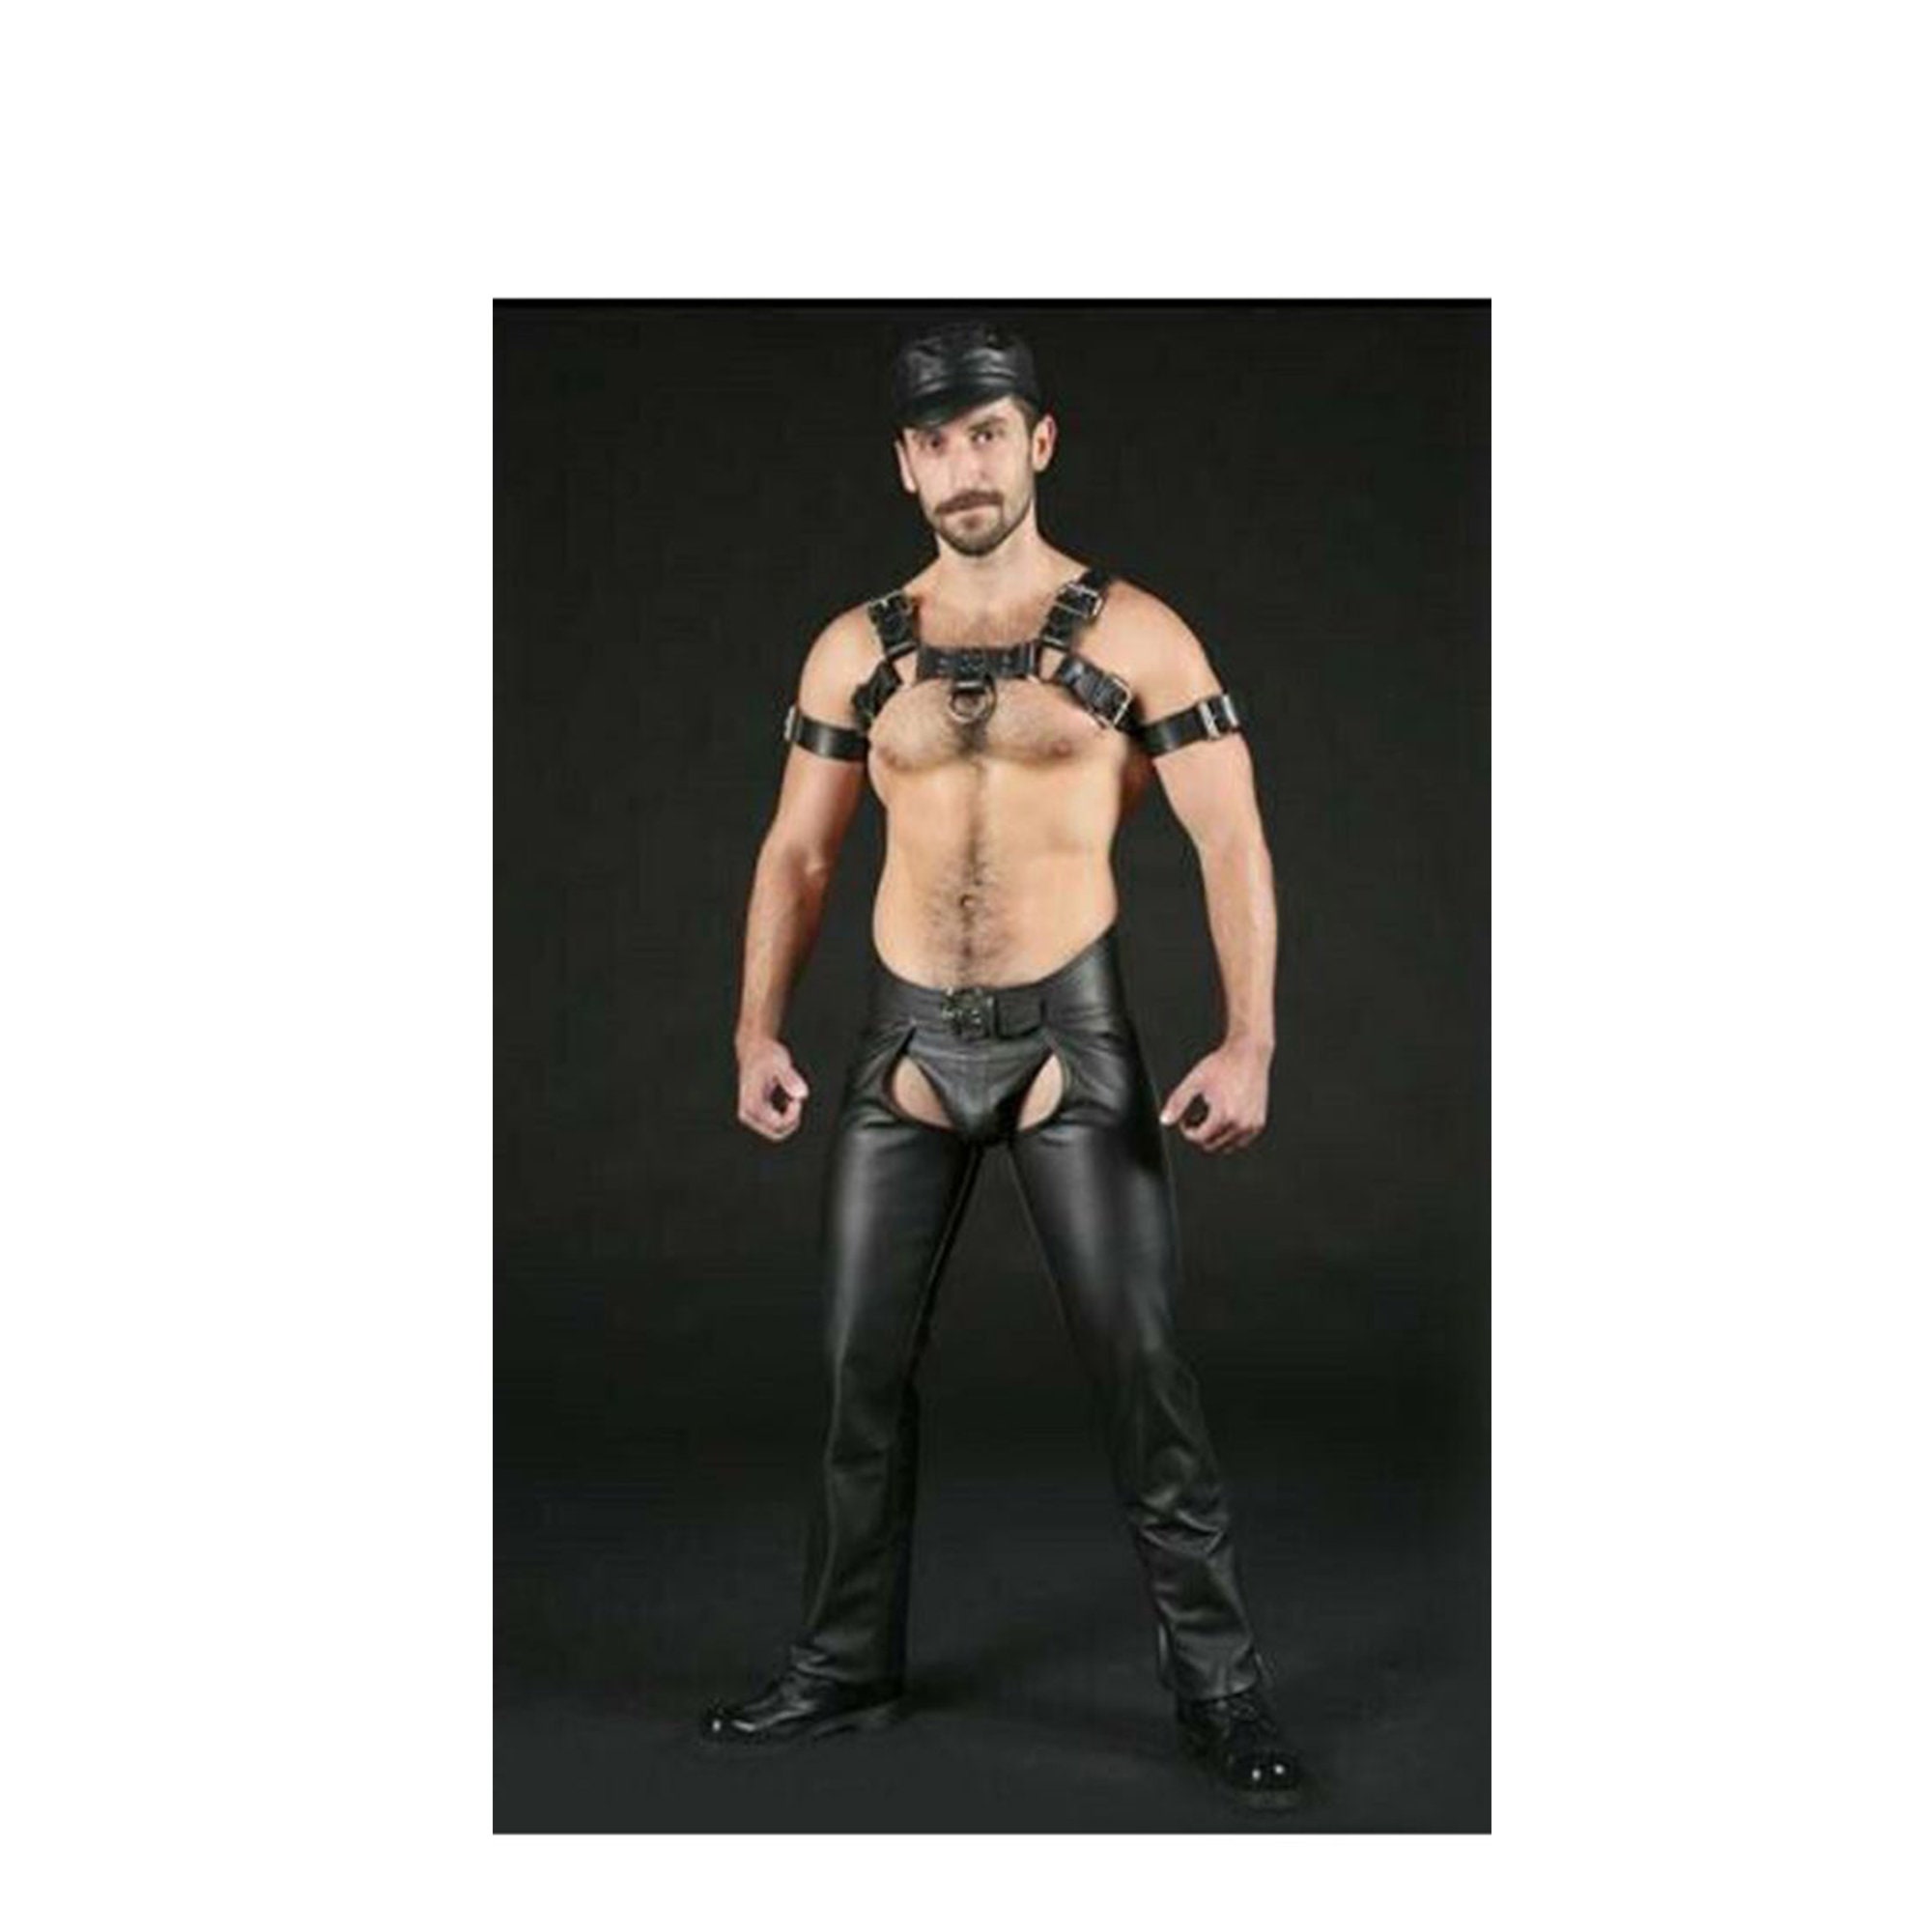 Chaps For Men Leather Chaps For Men Assless Chaps Chaps - Etsy 日 本.